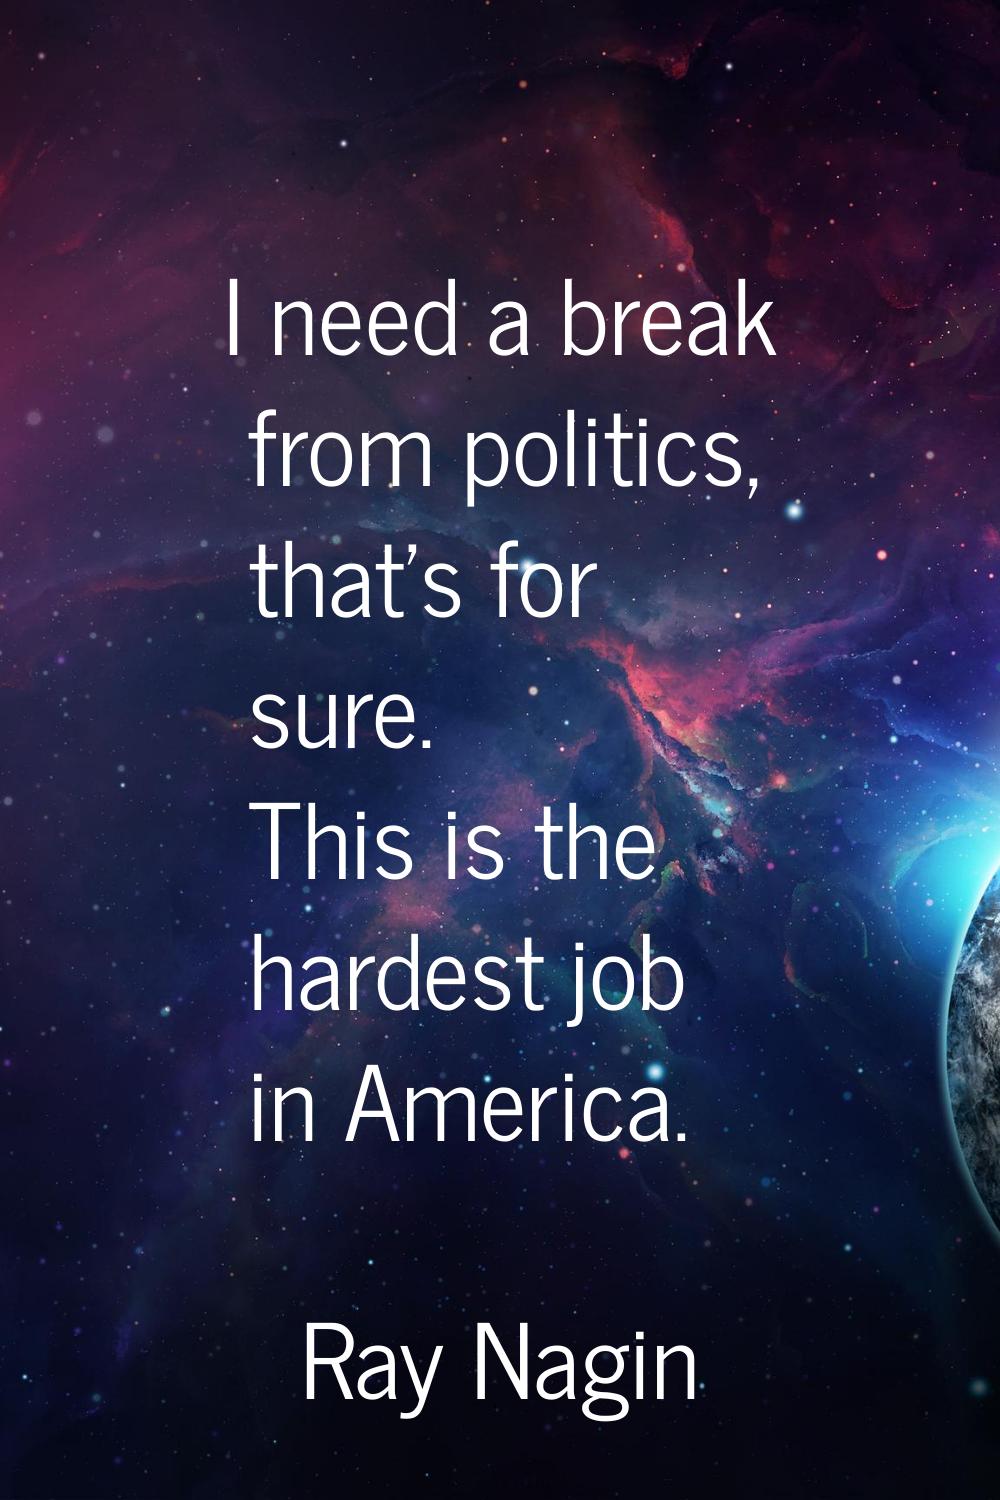 I need a break from politics, that's for sure. This is the hardest job in America.